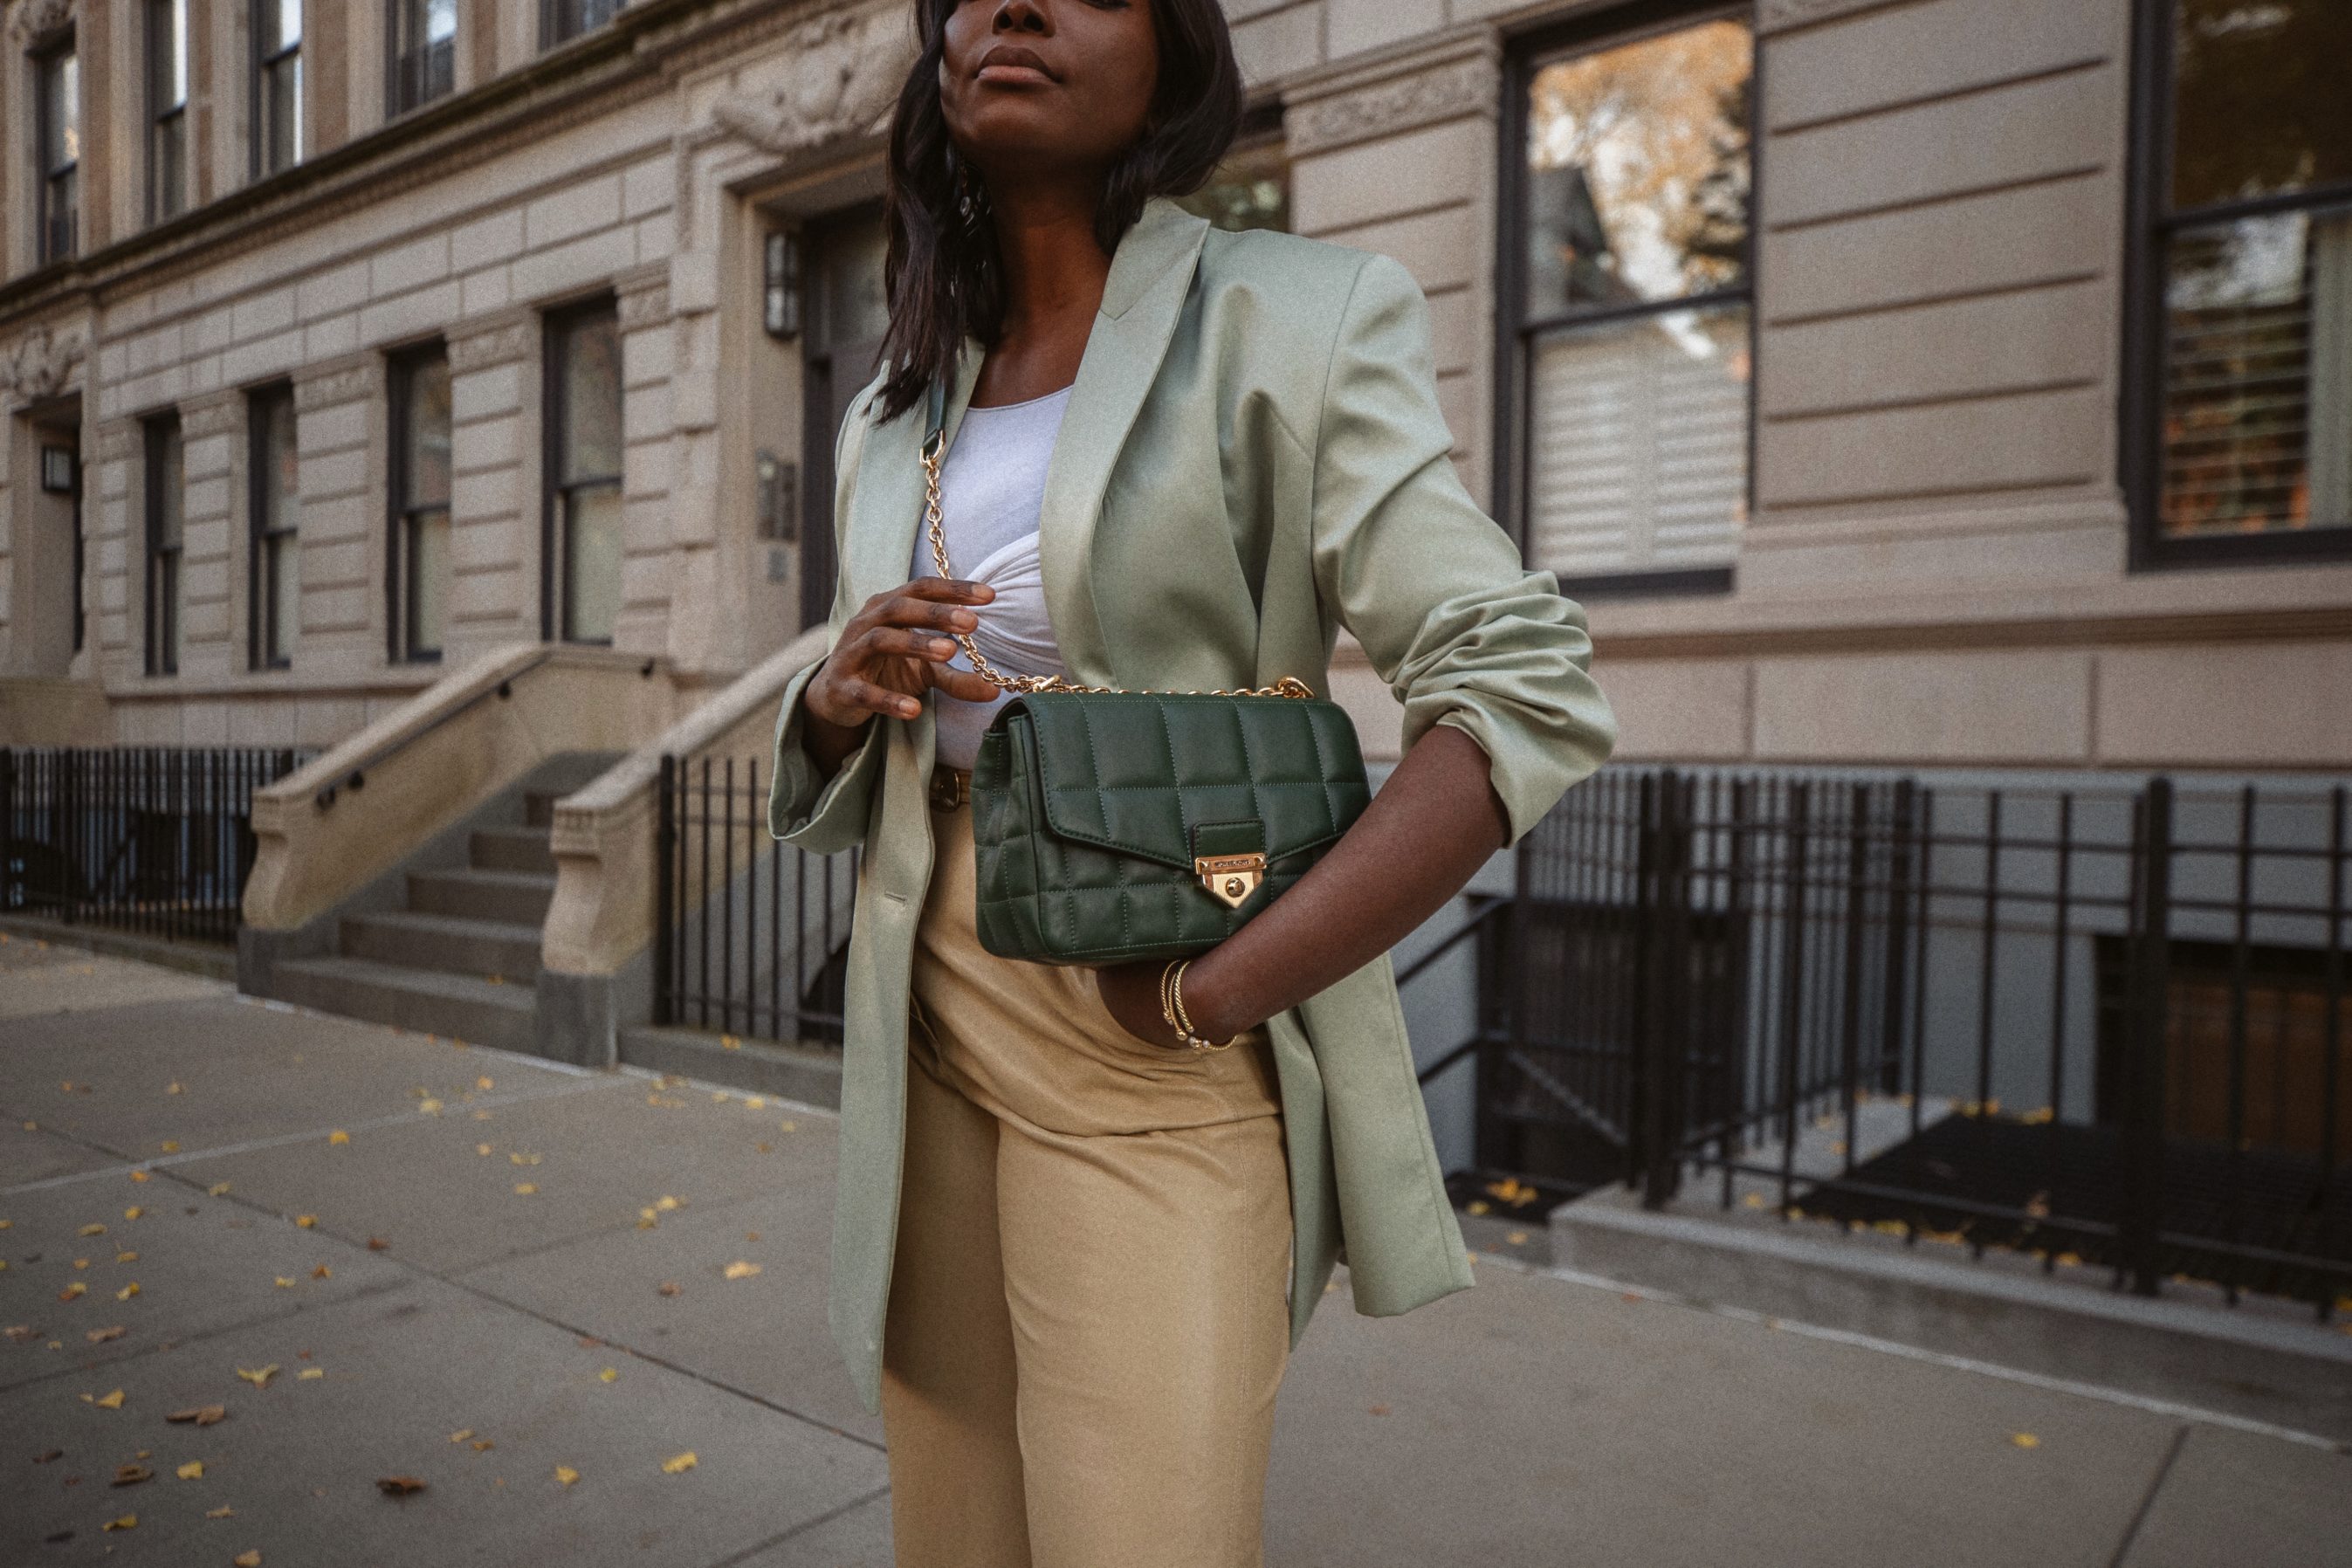 Michael Kors Soho Bag Review & Styling Tips » coco bassey